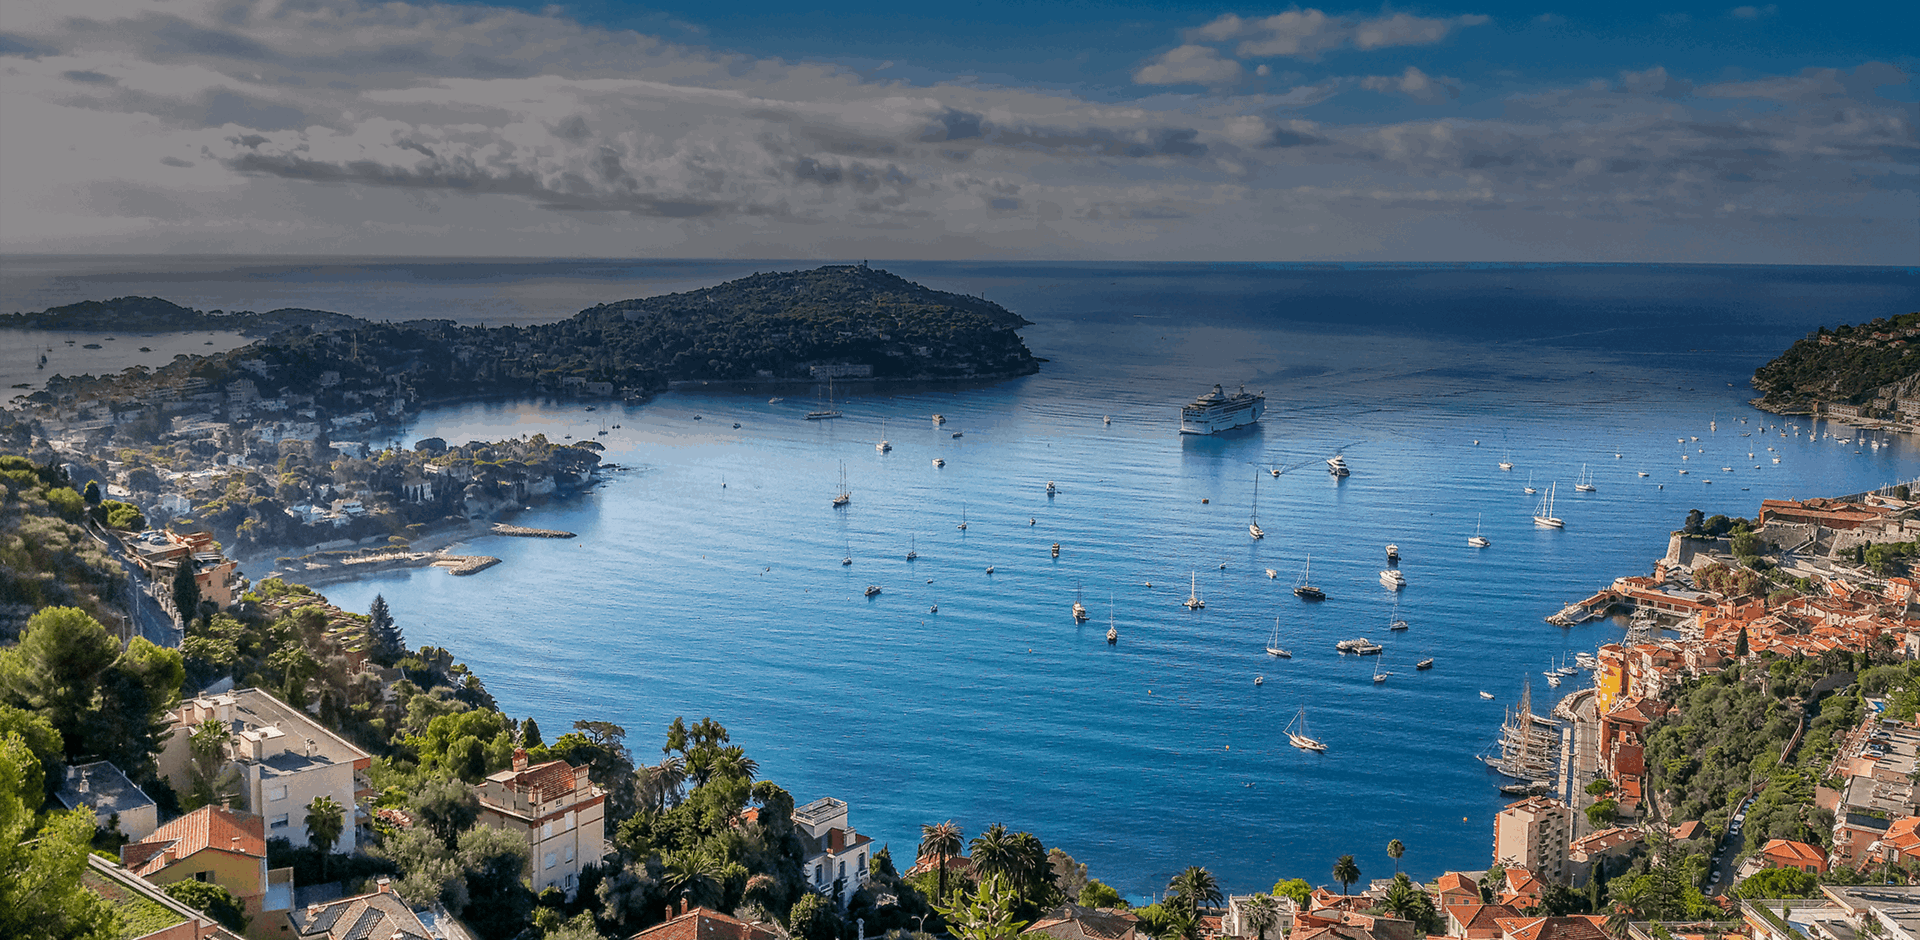 View from the top of the town overlooking houses and small boats with a cruise ship in the Bay Of Villefranche-Sur-Mer, France